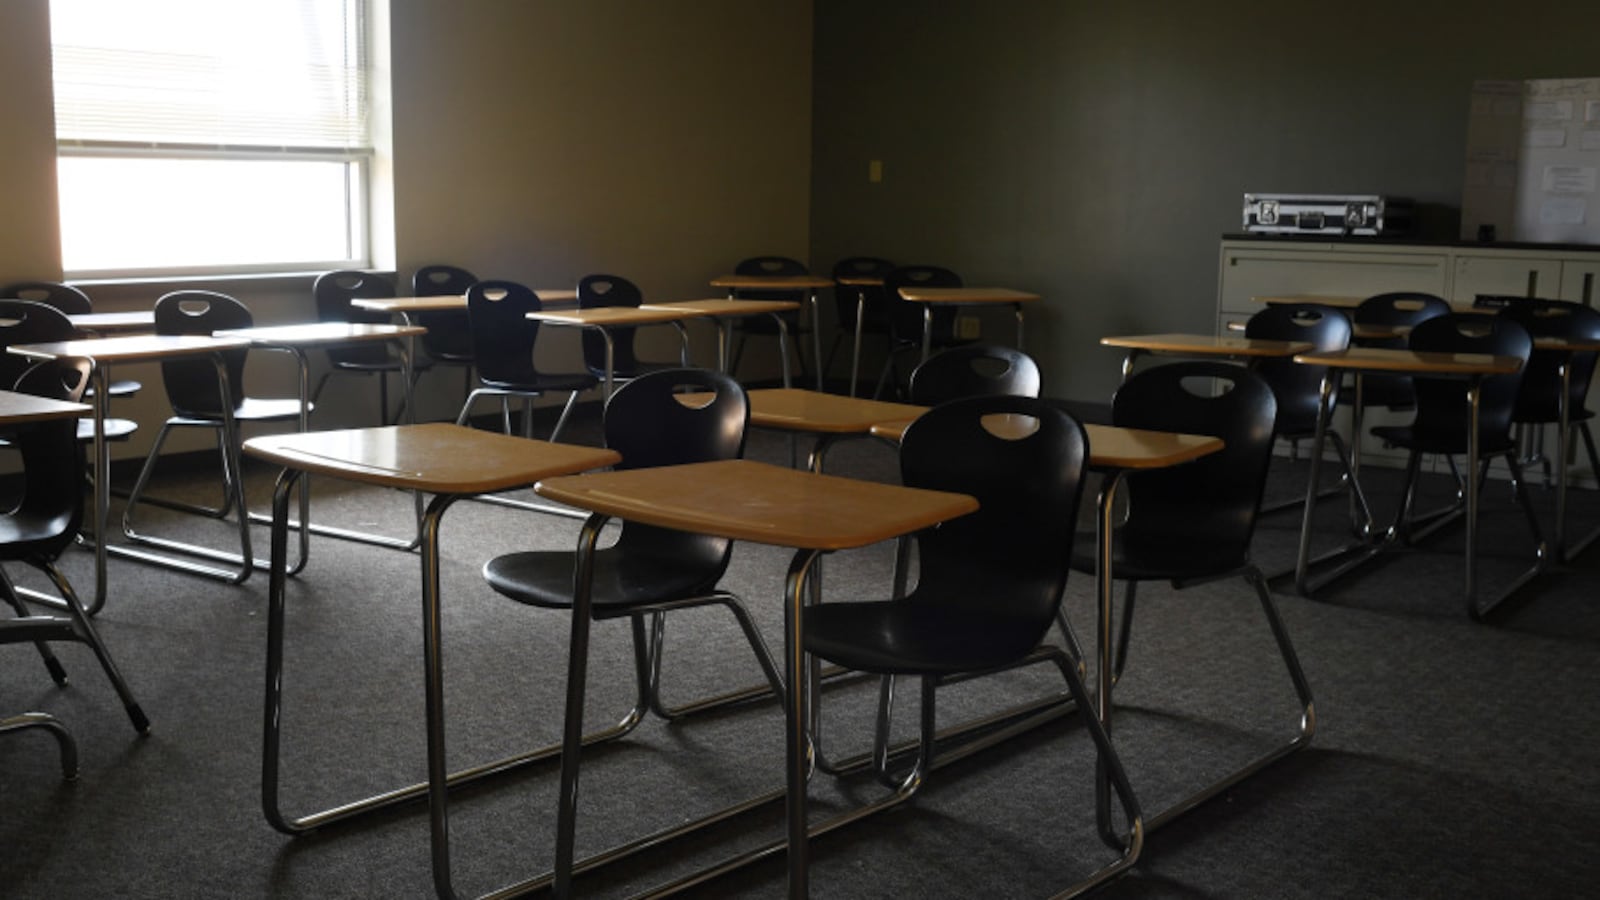 No students are in the classrooms at Lakewood High School on March 16, 2020, in Lakewood, Colorado.